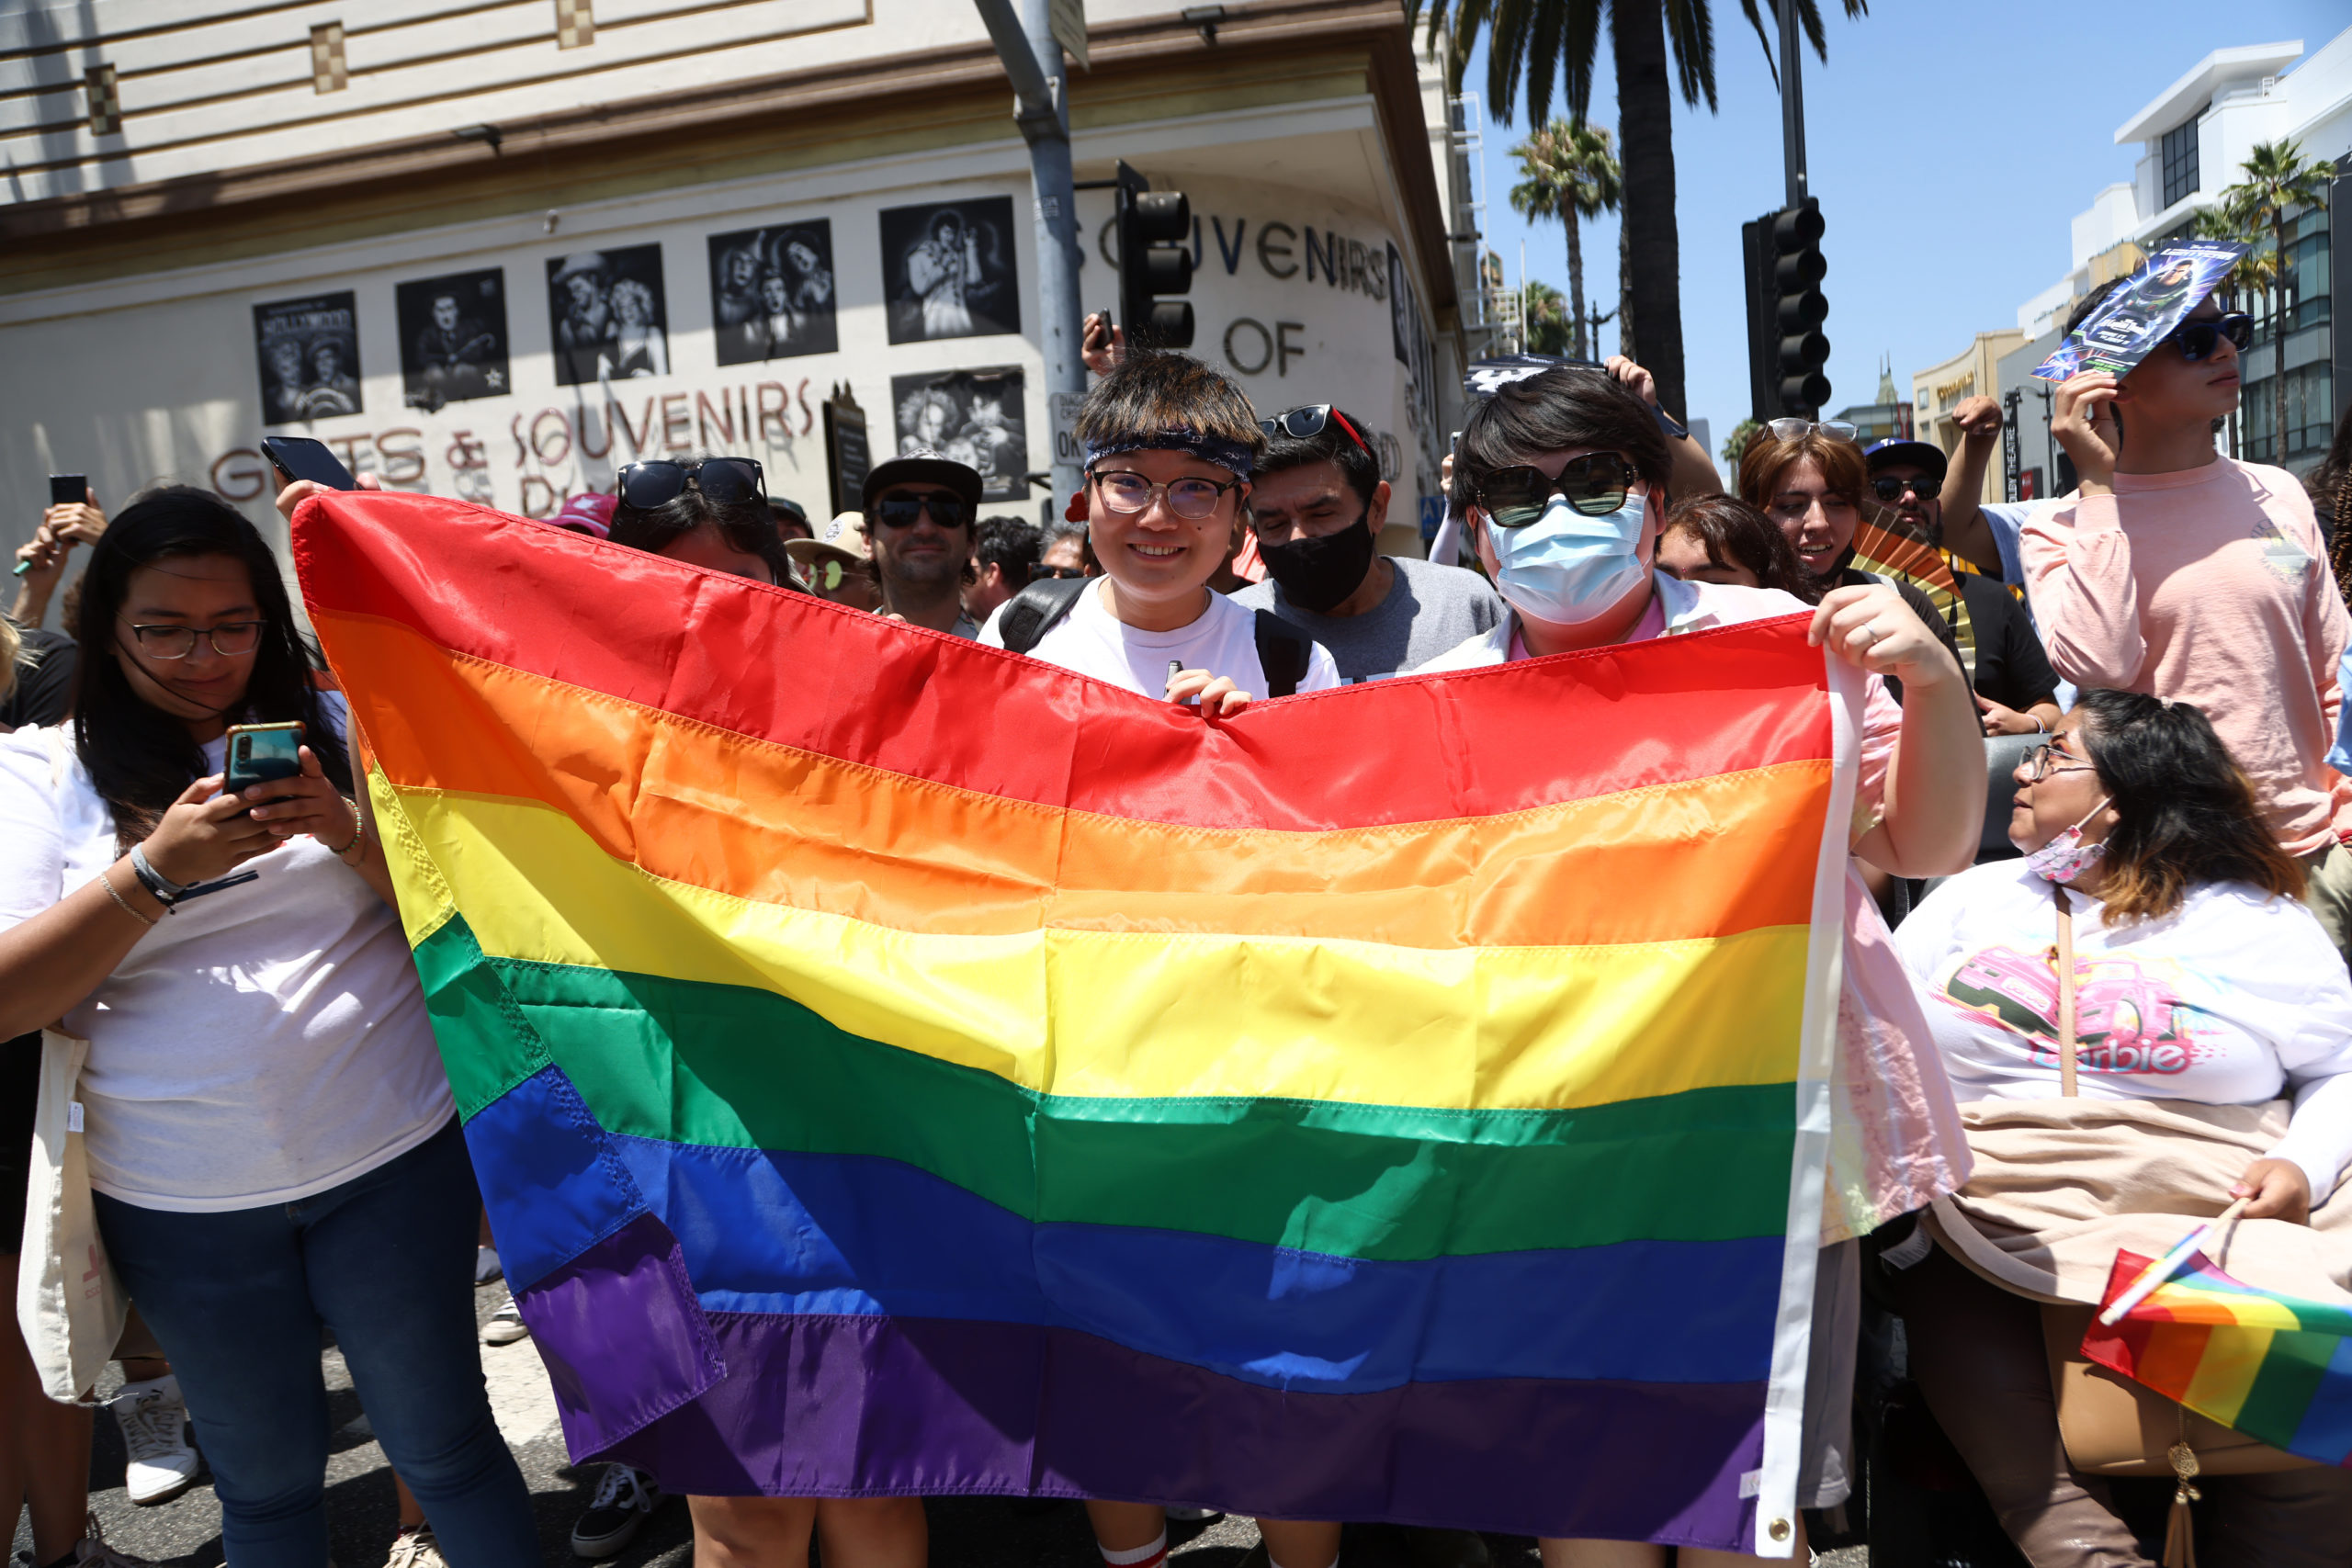 Parade participants attend Christopher Street West (CSW) LA Pride Parade Presented By TikTok "Love Your Pride" on June 12, 2022 in Los Angeles, California. (Photo by Tommaso Boddi/Getty Images)